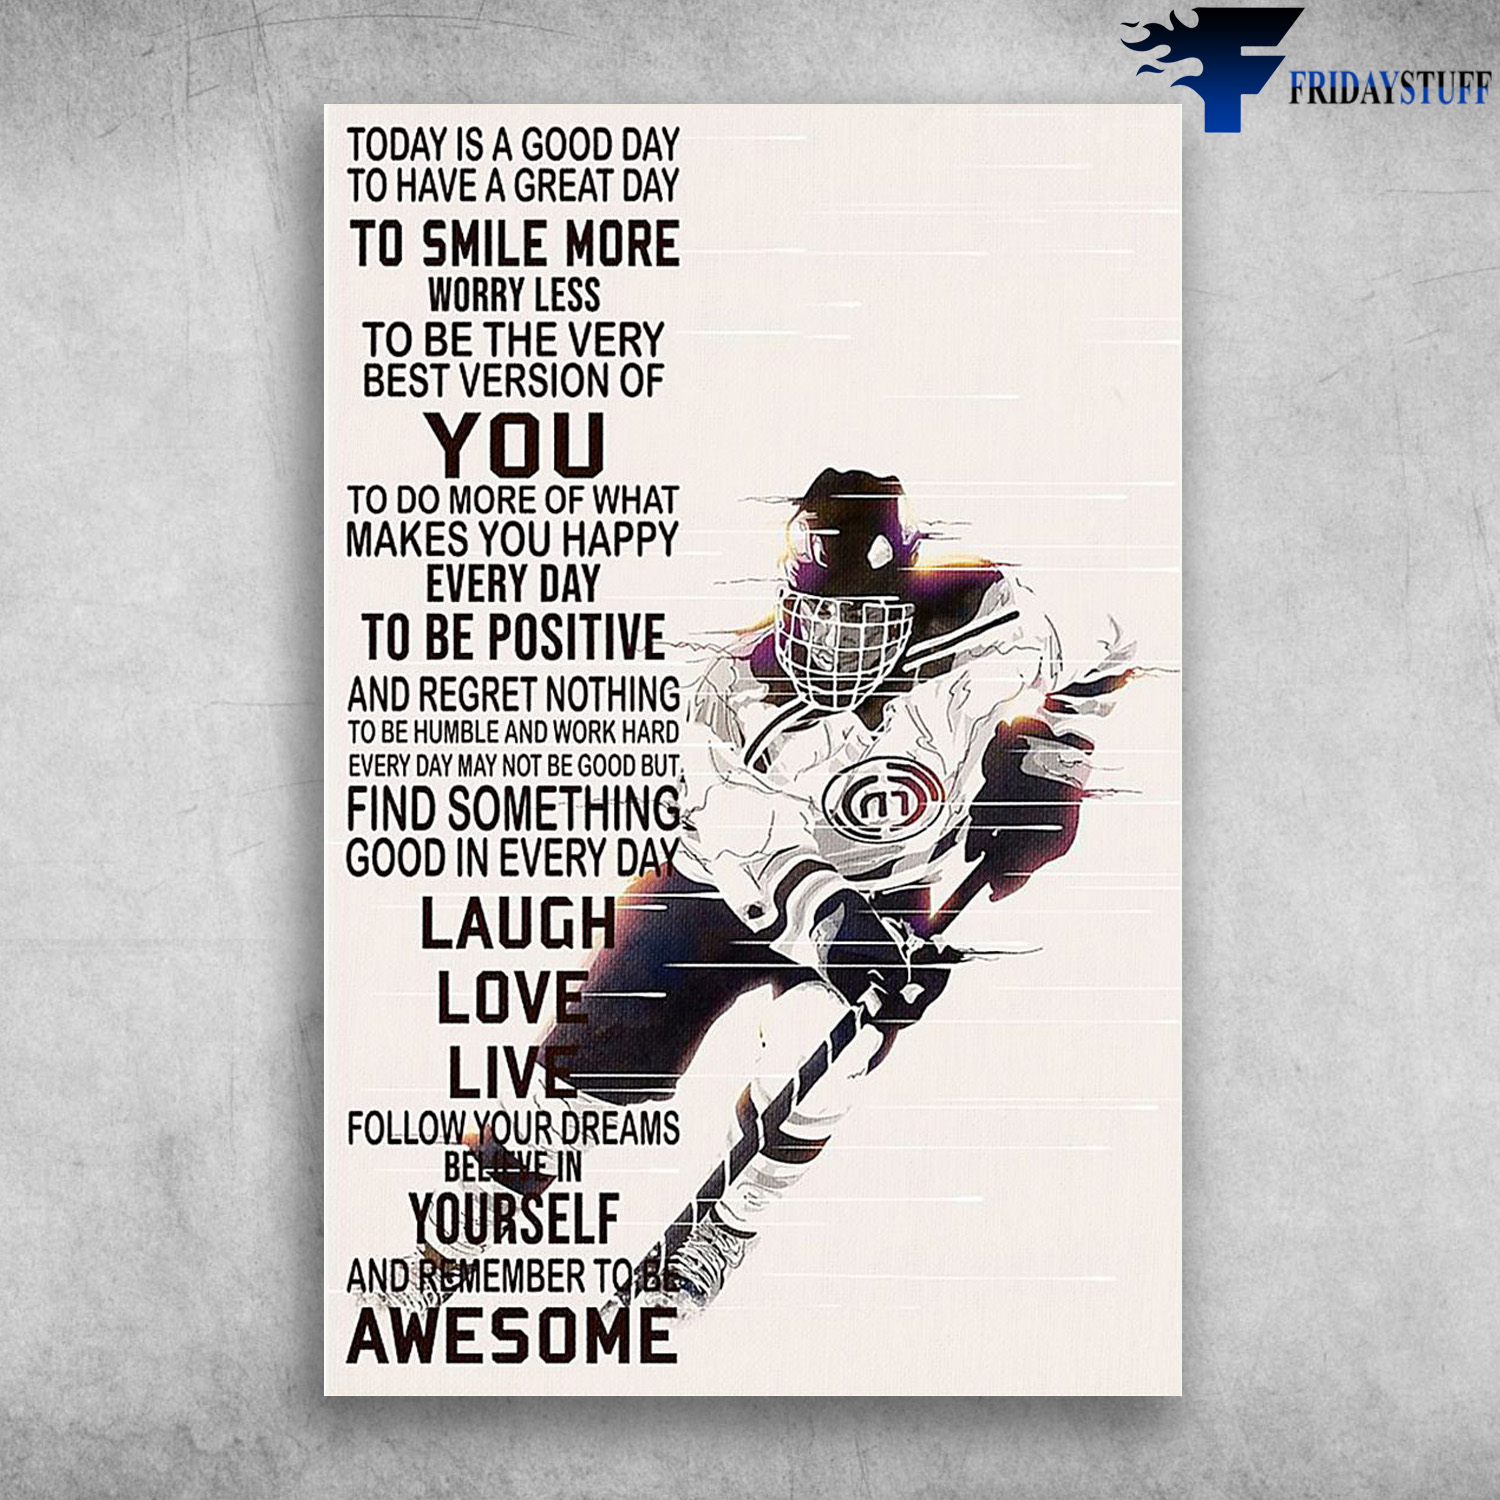 Hockey Man - Today Is A Good Day, To Have A Great Day, To Smile More Worry Less, To Be The Very Best Verssion Of You, To Do More Of What Makes You Happy Everyday, To Be Positive And Regret Nothing To Be Humble And Work Hard Everyday May Not Be Good